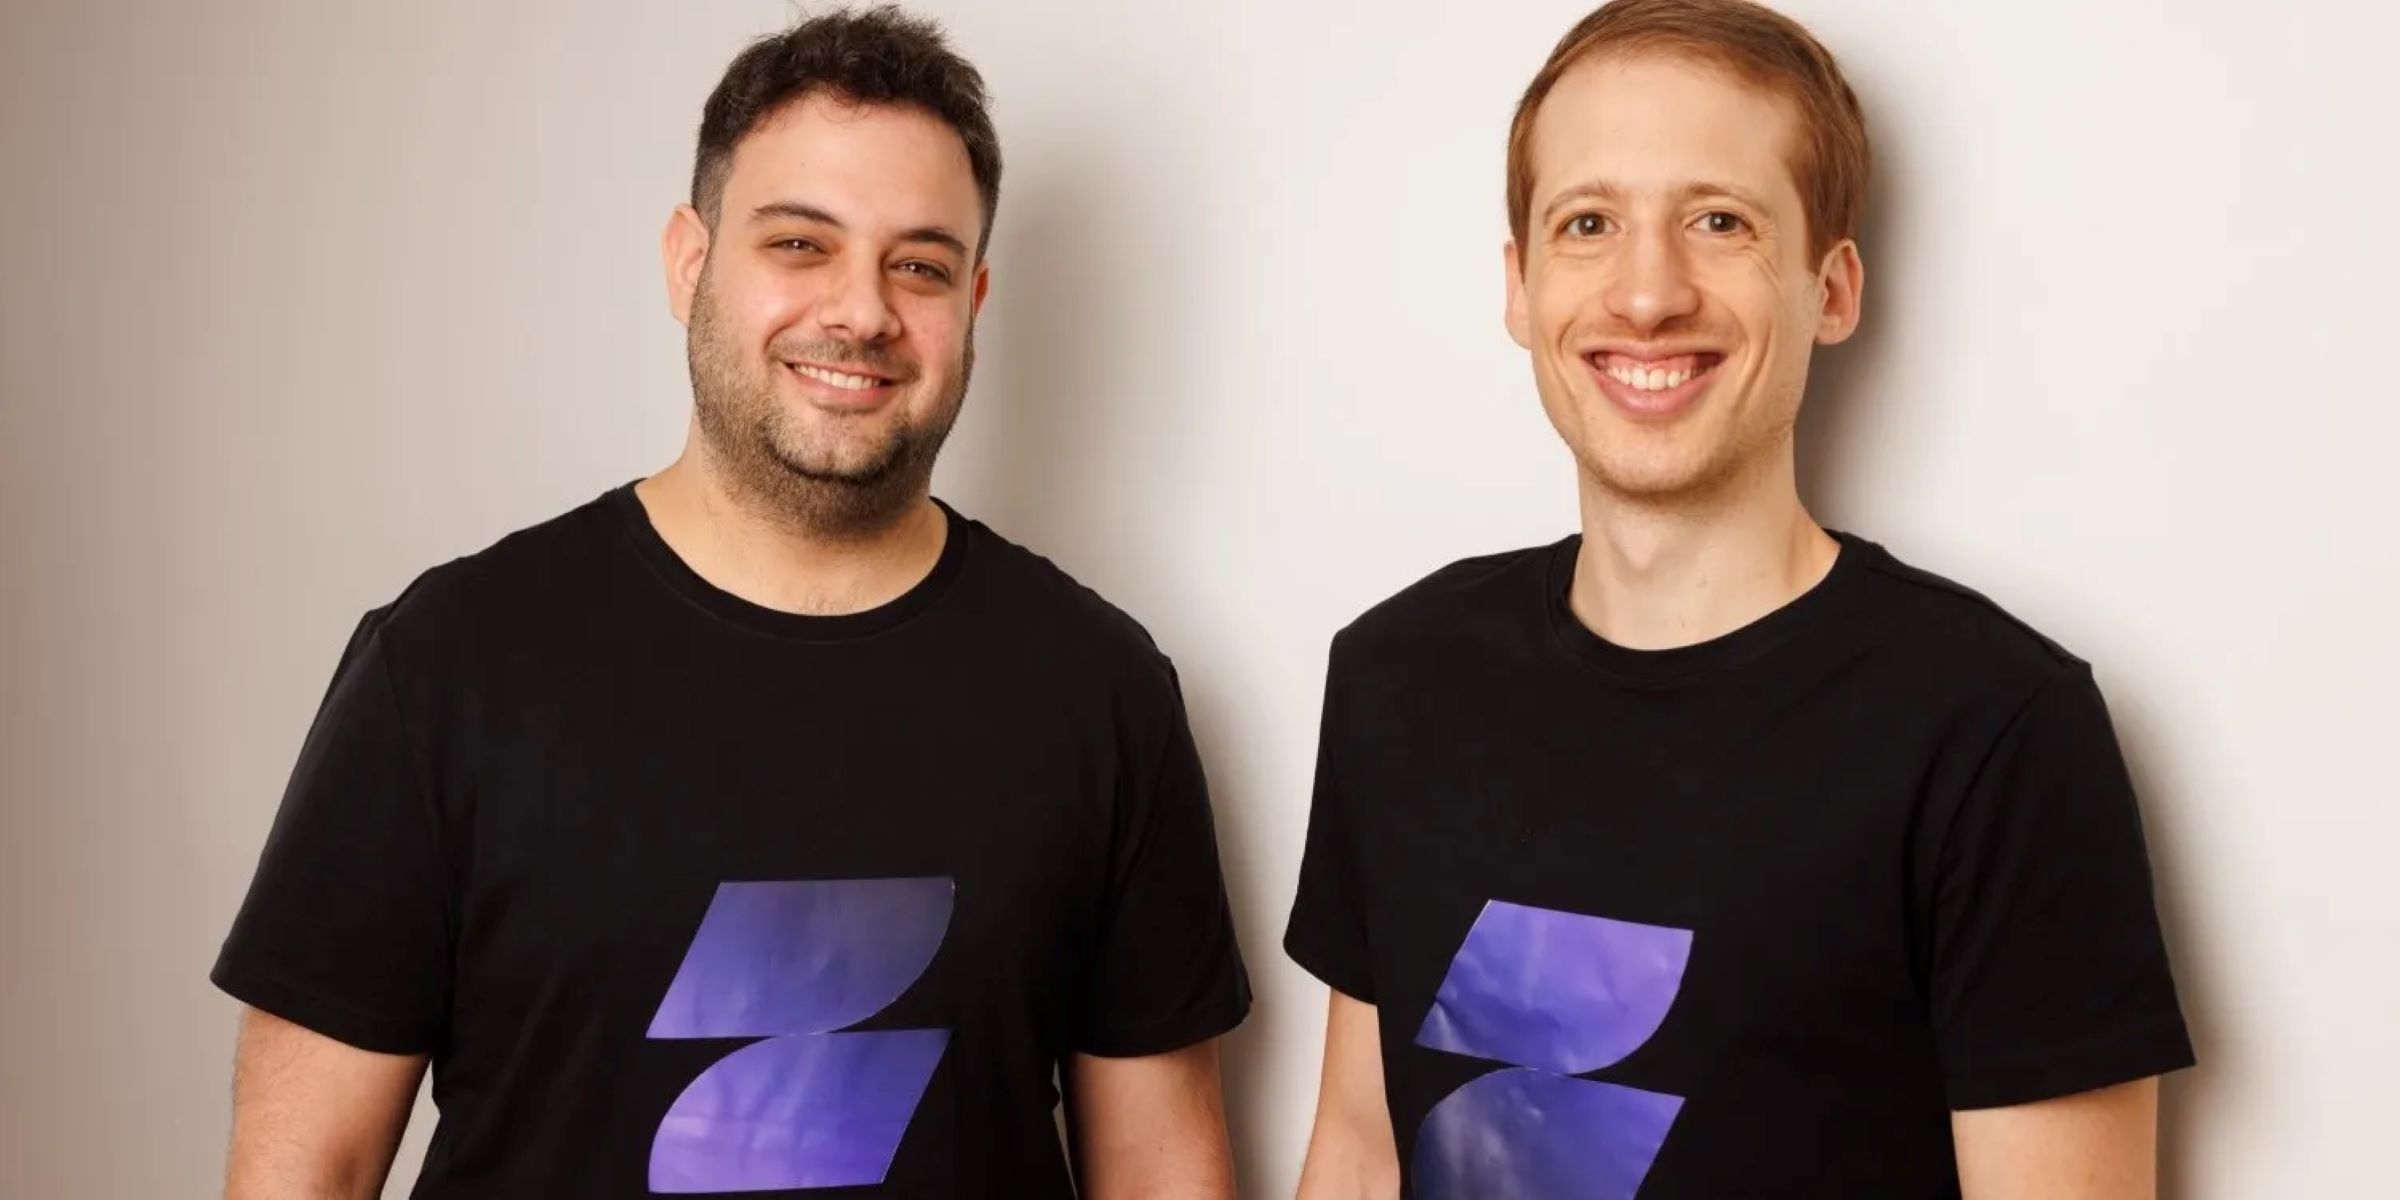 zenity-raises-16-5-million-in-series-a-funding-to-enhance-security-for-no-code-low-code-apps